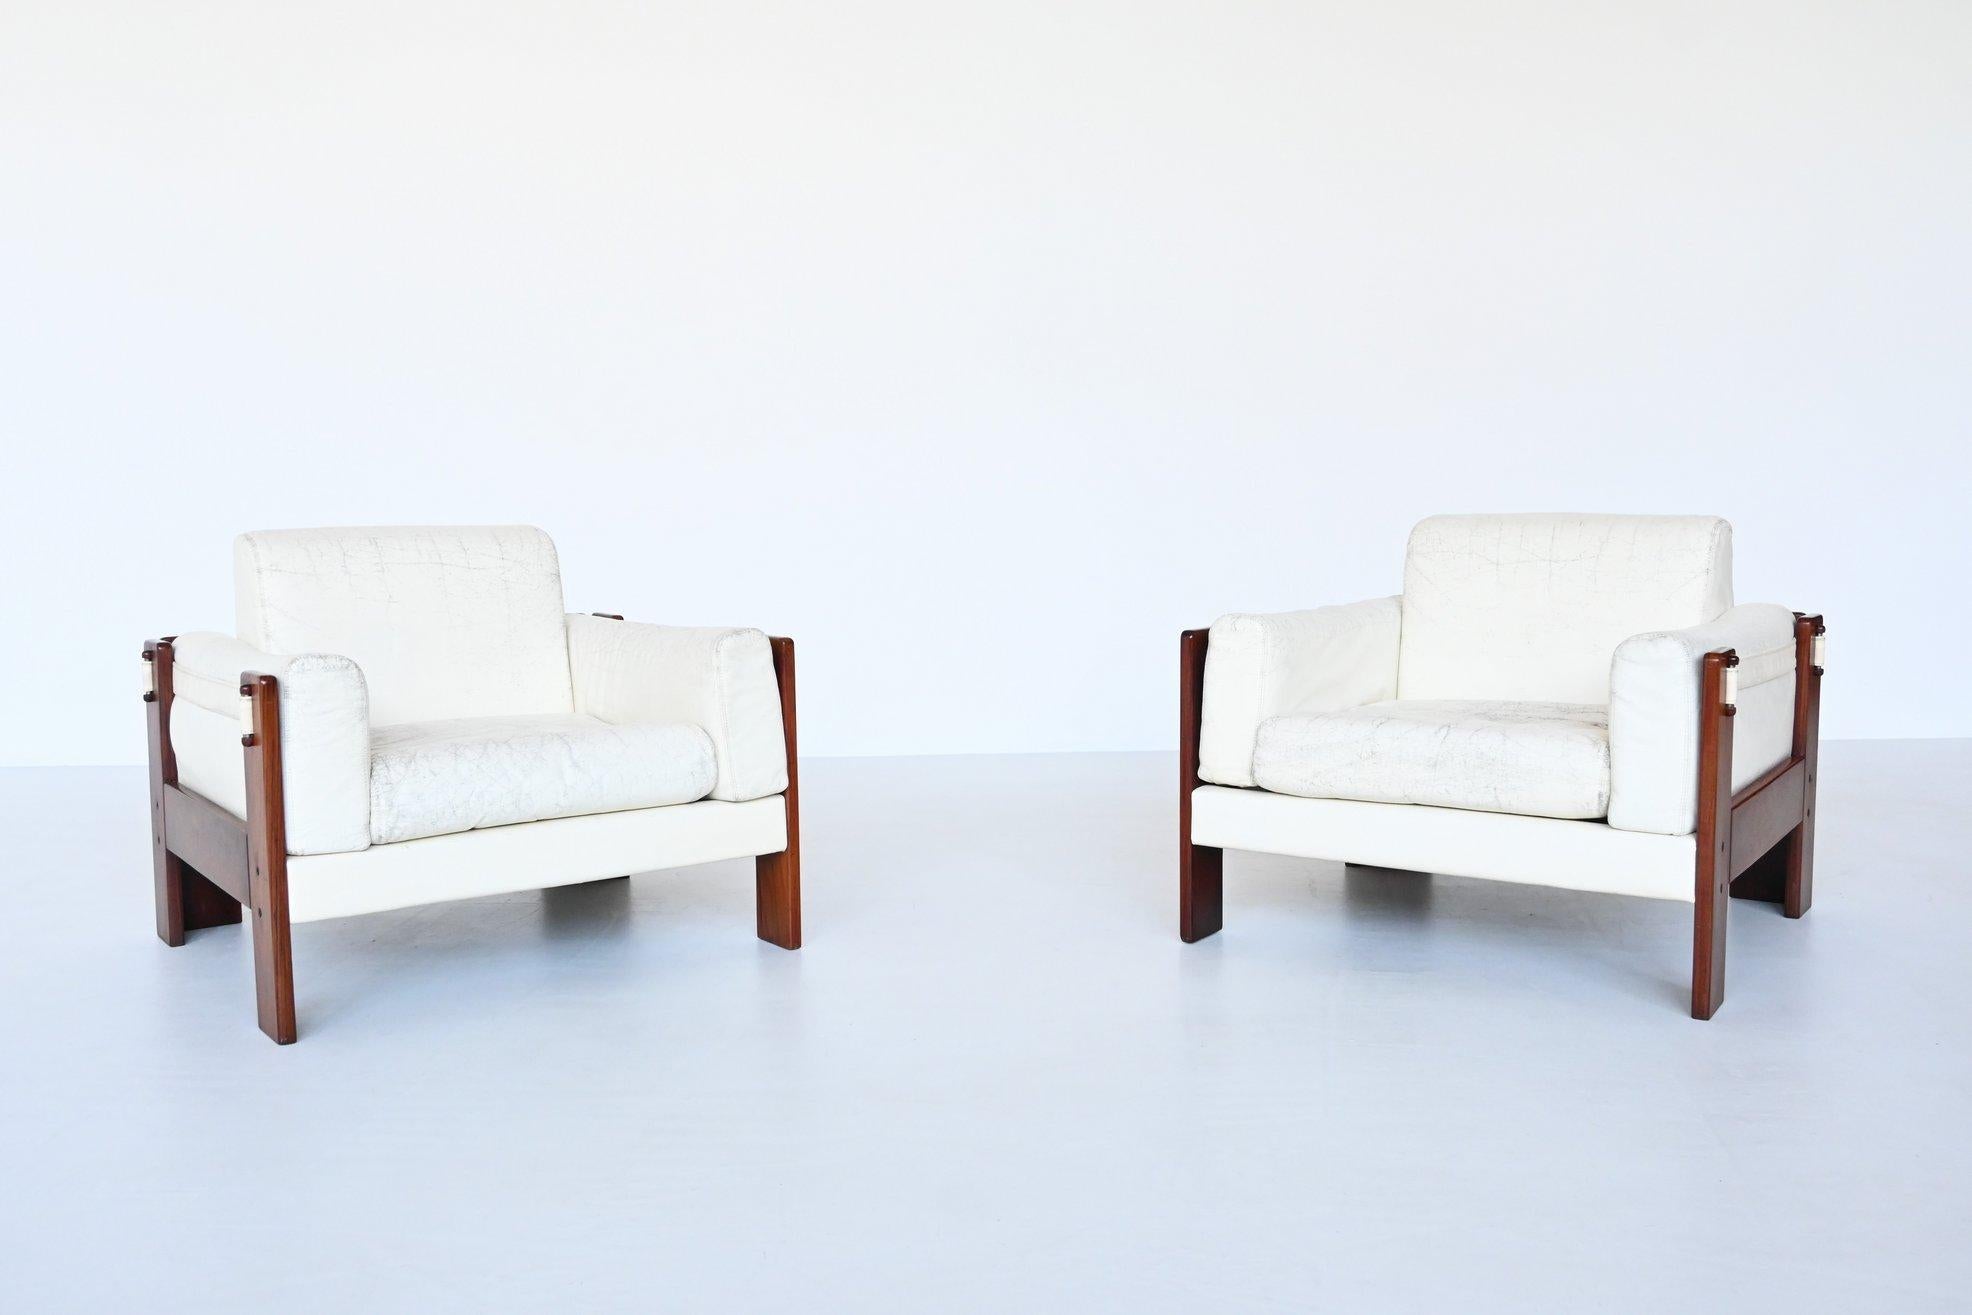 Beautiful shaped Italian lounge chairs in the style of Tobia Scarpa and Percival Lafer, Italy 1970. This unique pair of lounge chairs has a solid rosewood frame with white leather cushions. The model is very reminiscent of Tobia Scarpa's Bastiano